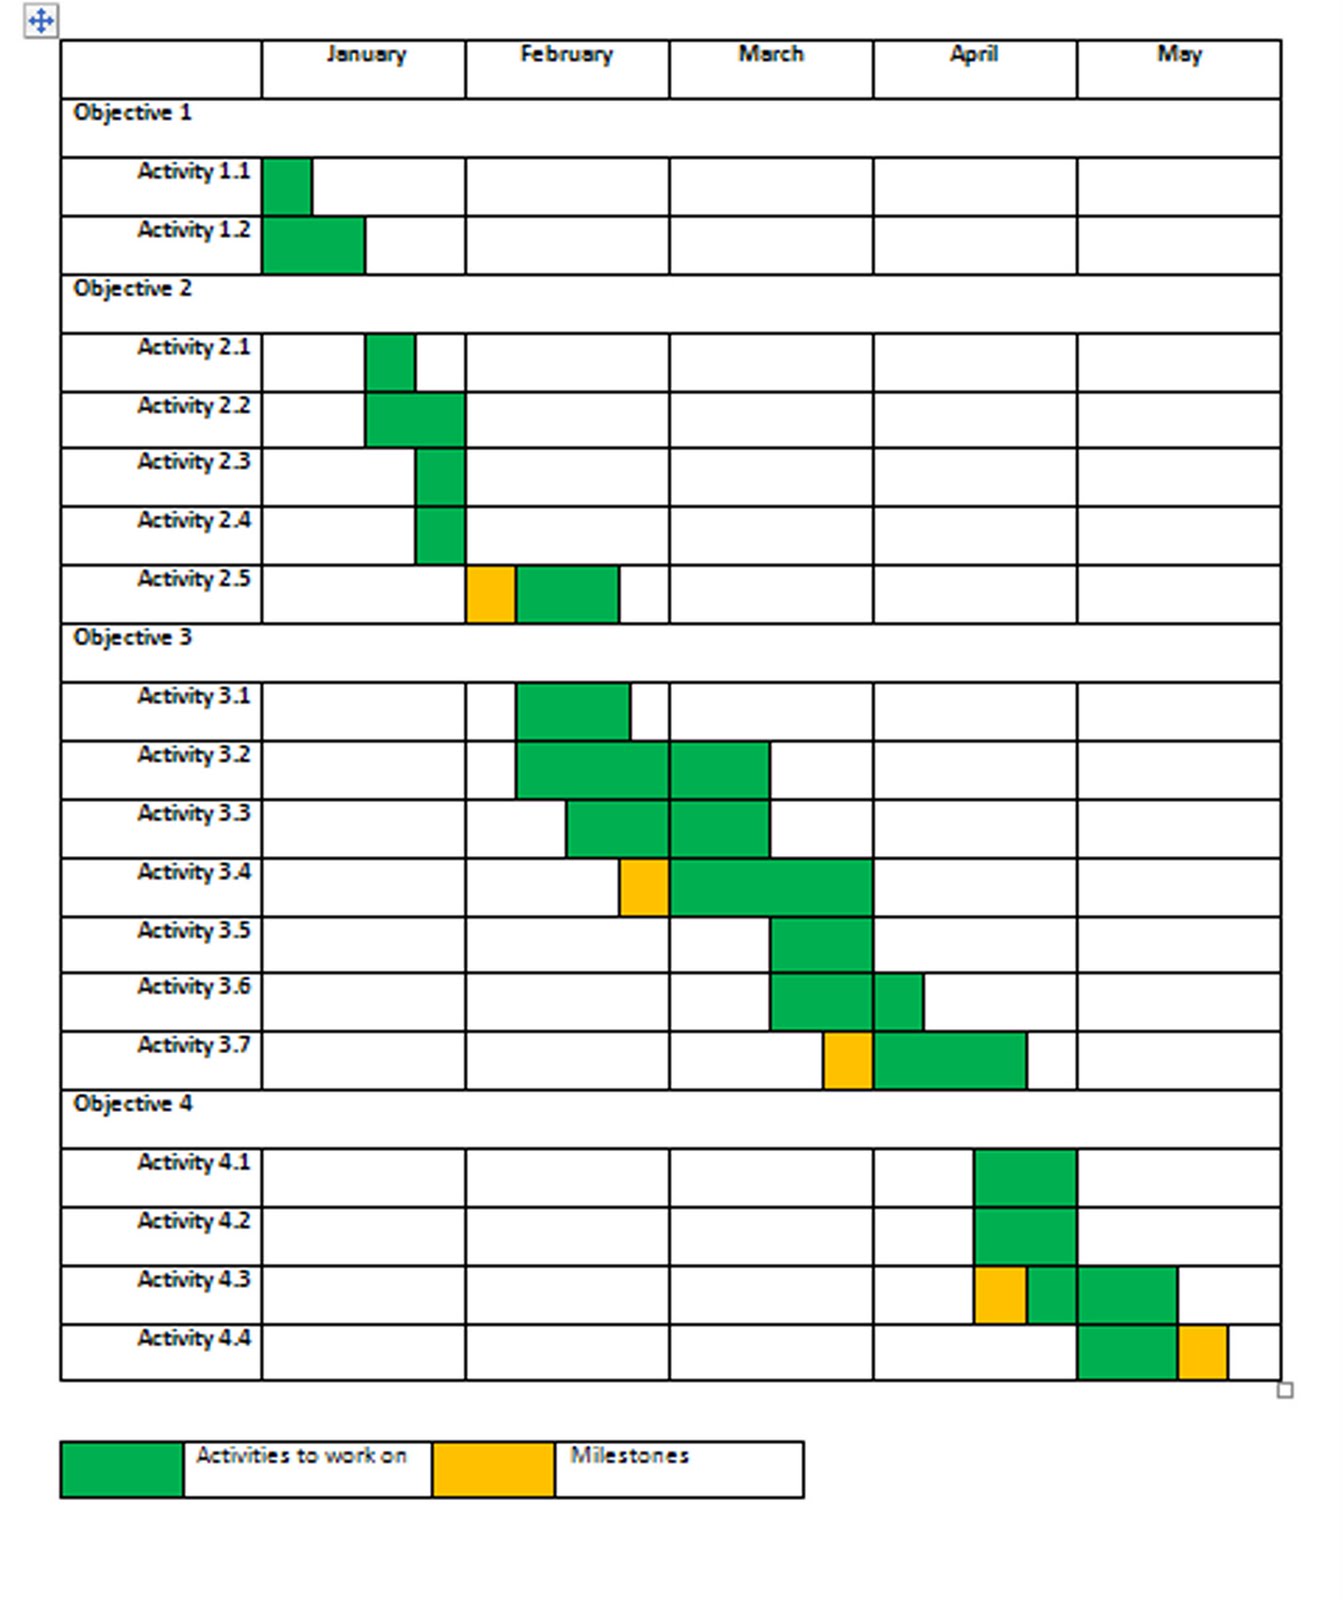 Gantt charts in ms project - vsafour